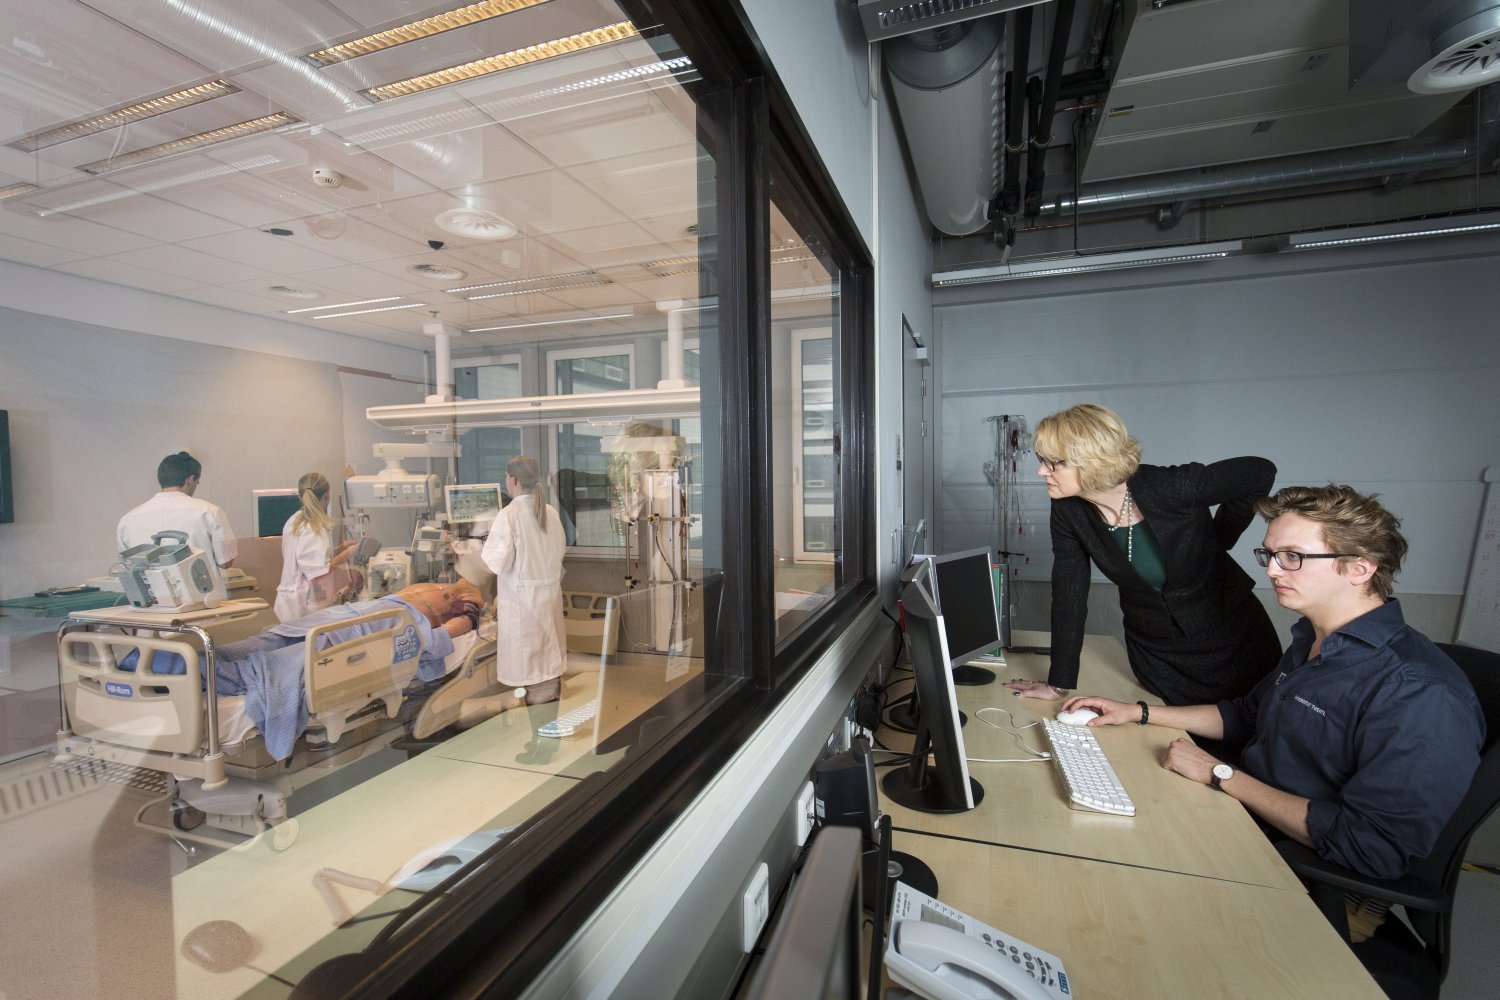 Dutch Medtech Factory Twente expects first companies in its biomedical labs within a year